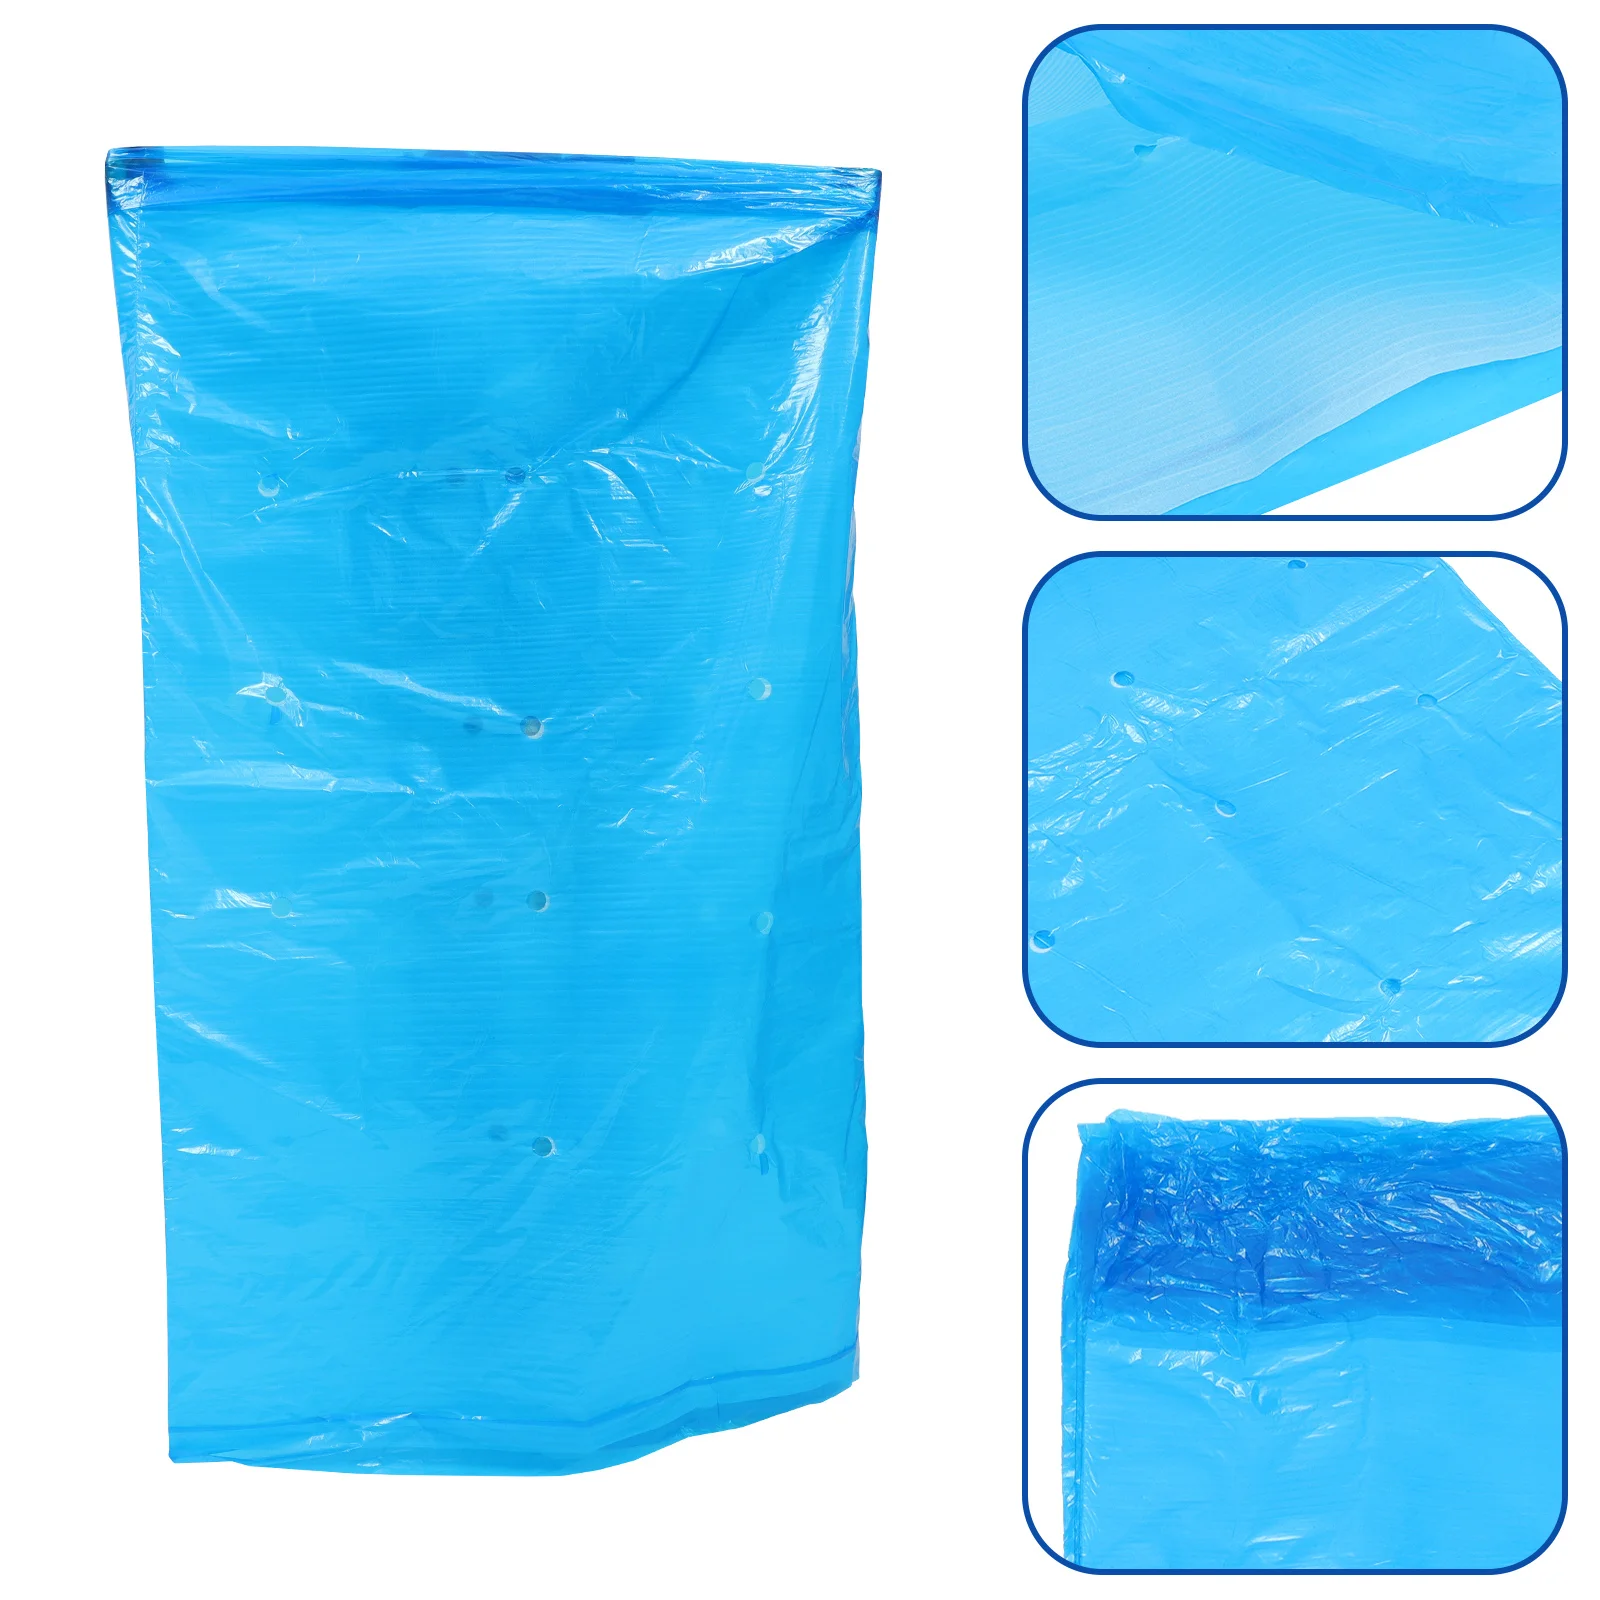 

Banana Grow Bag Rainproof Protection Cover Orchard Covers Protective Garden Insect-proof Bags Winter Sun Fruit